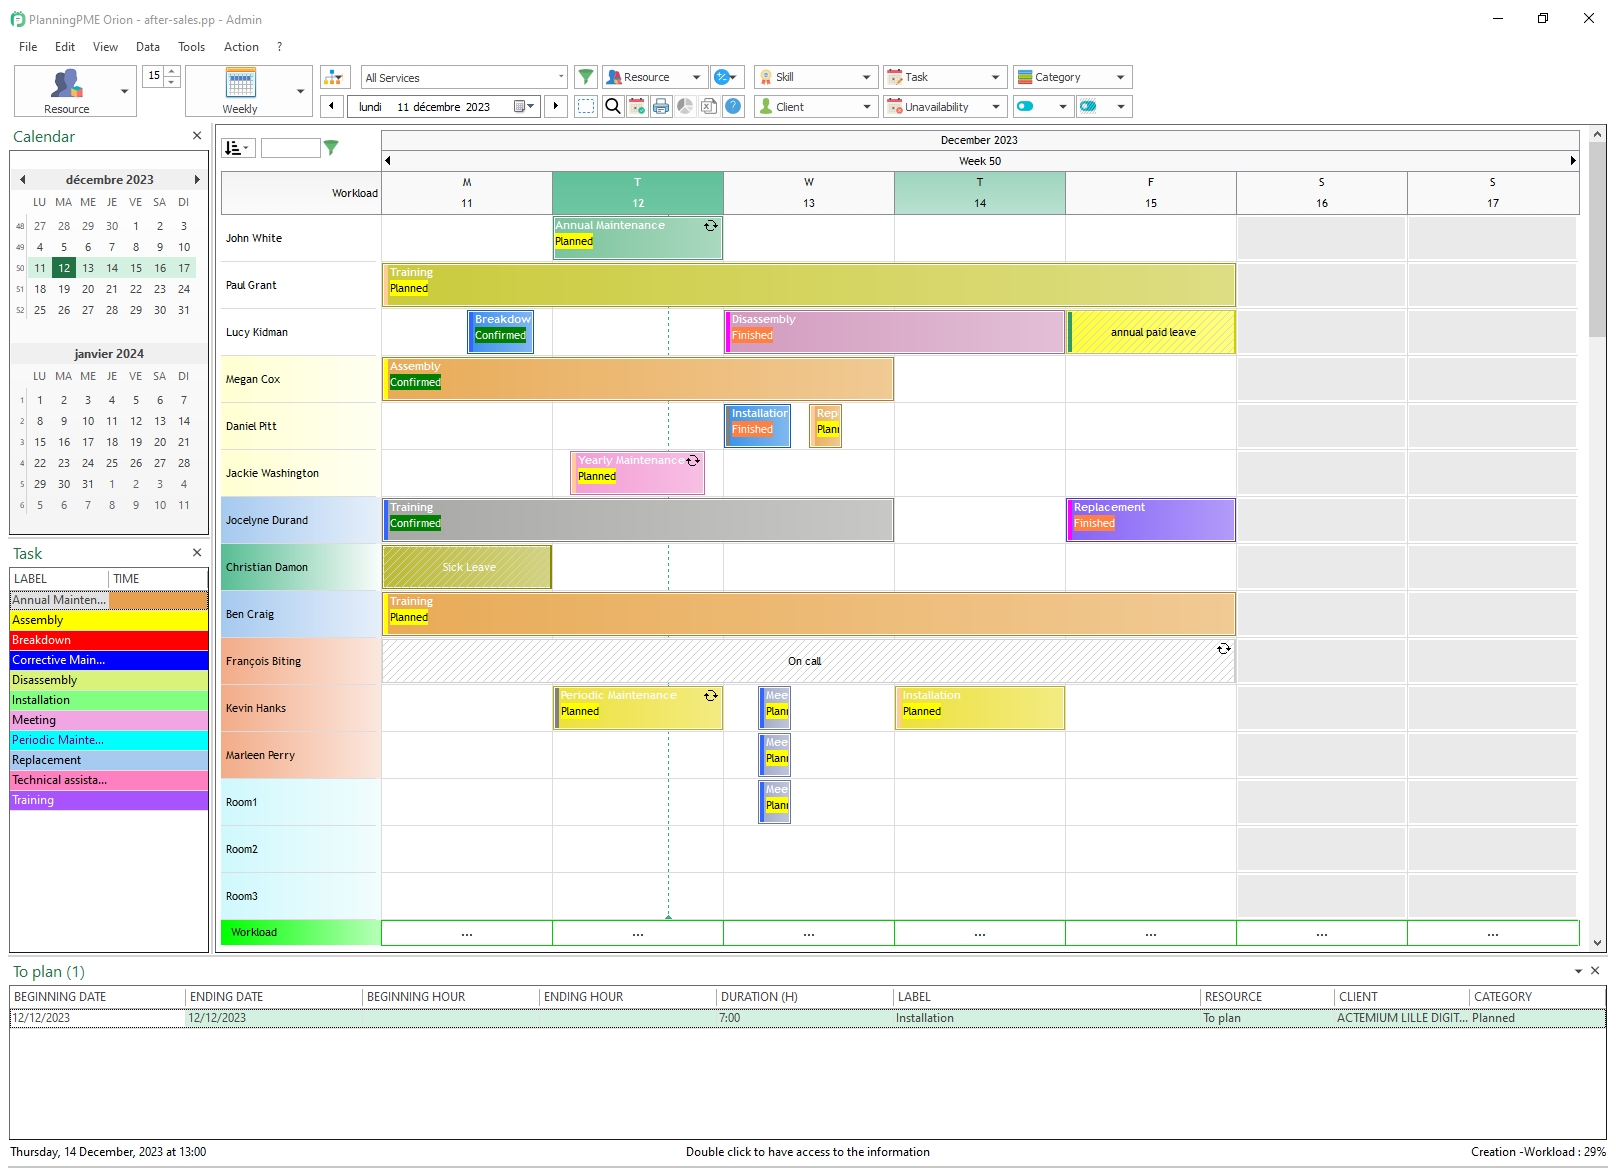 Monthly Rota Plan : Night Shift Schedule Template Lovely ...